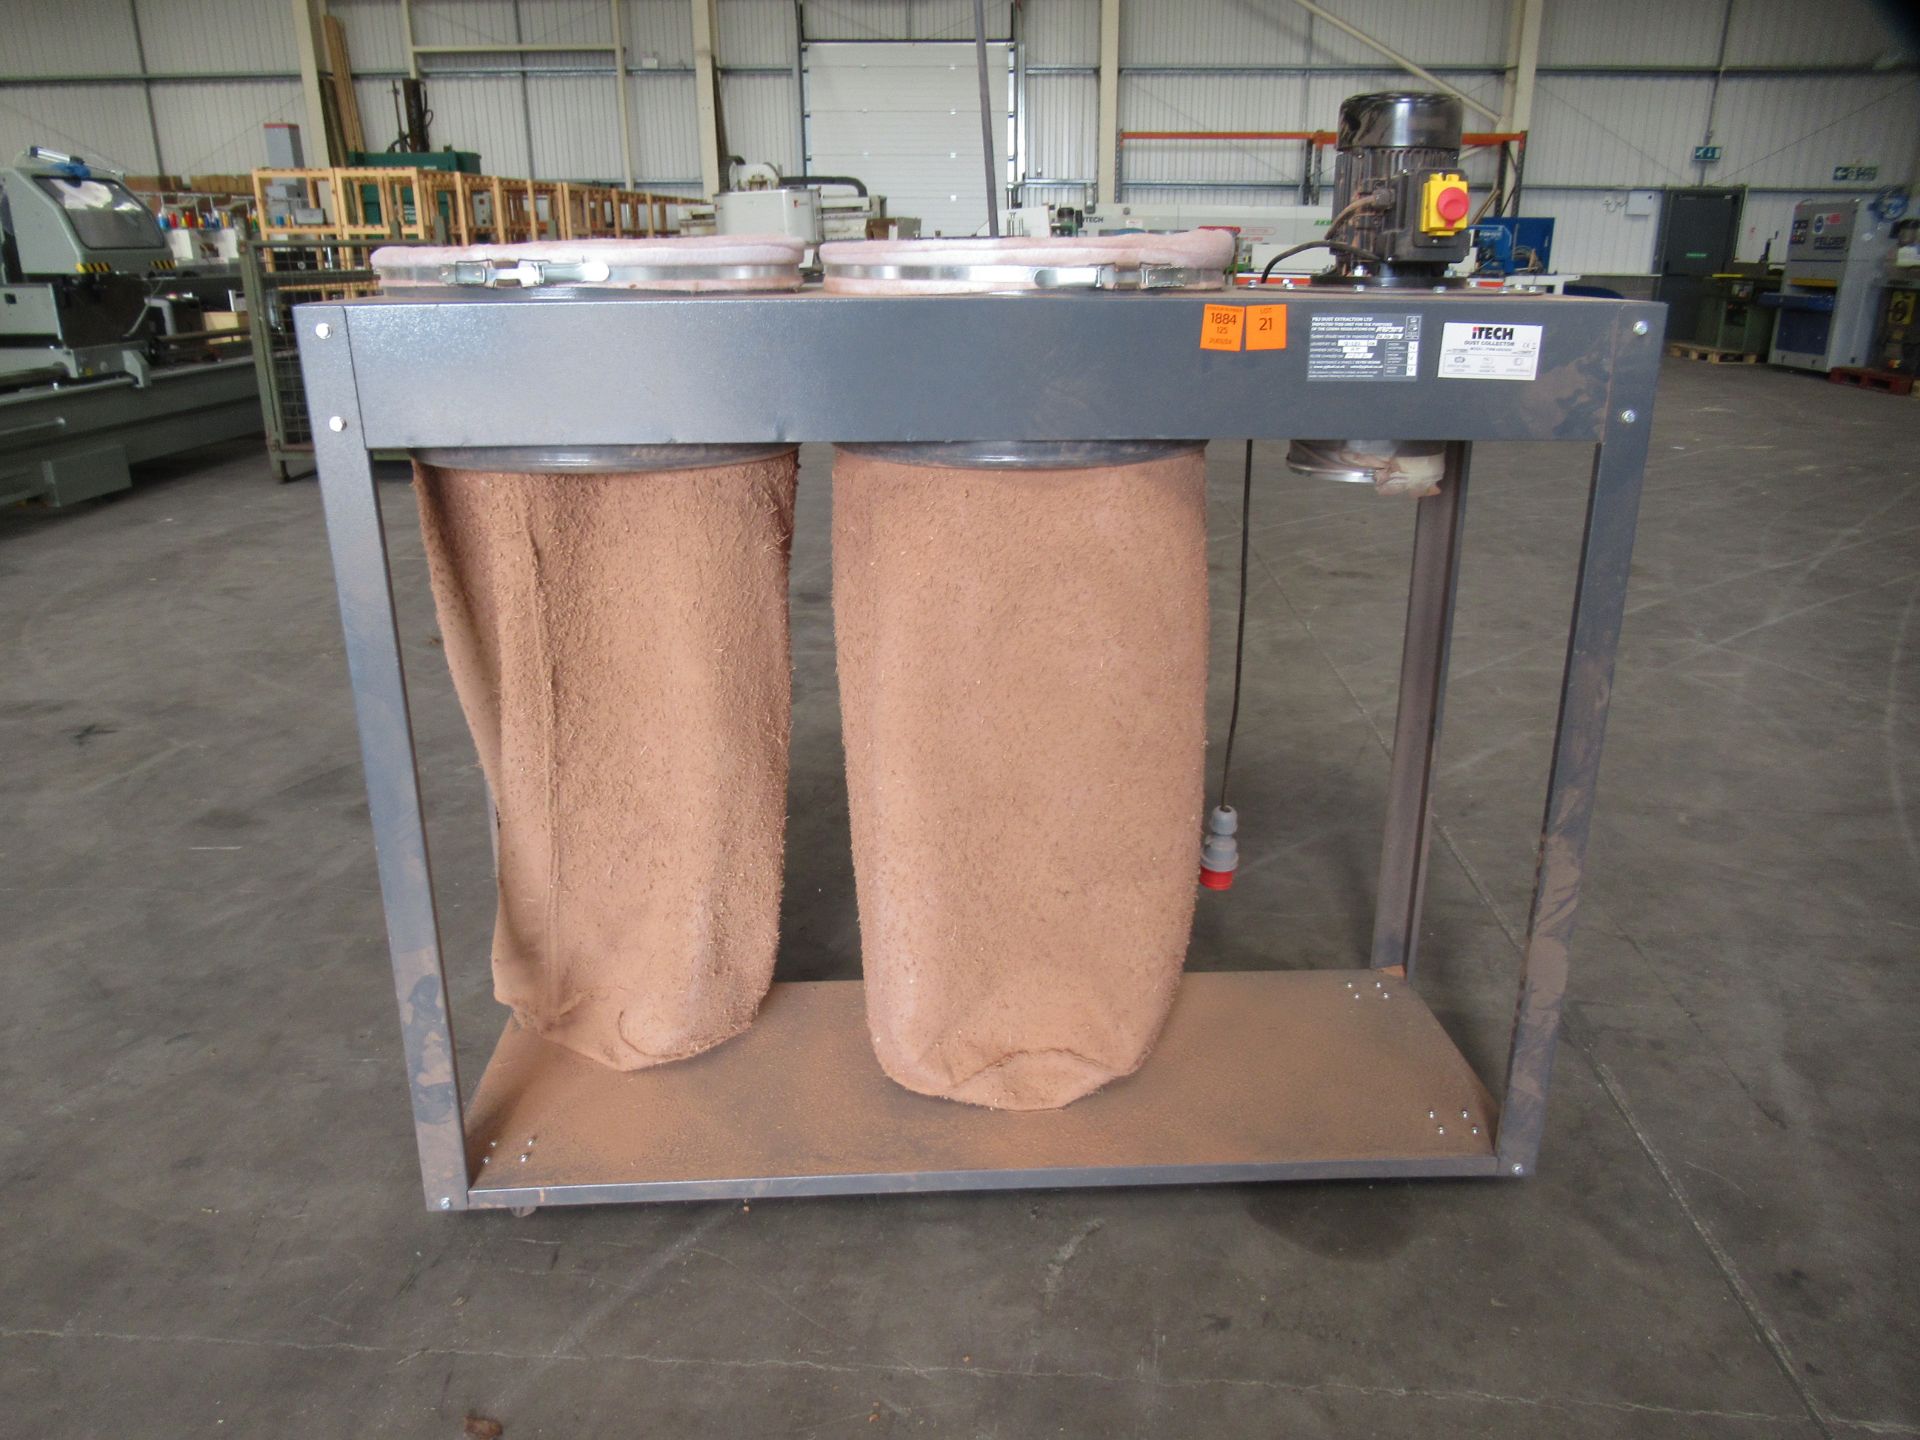 iTech Double-Bag Mobile Dust Collector - 3ph